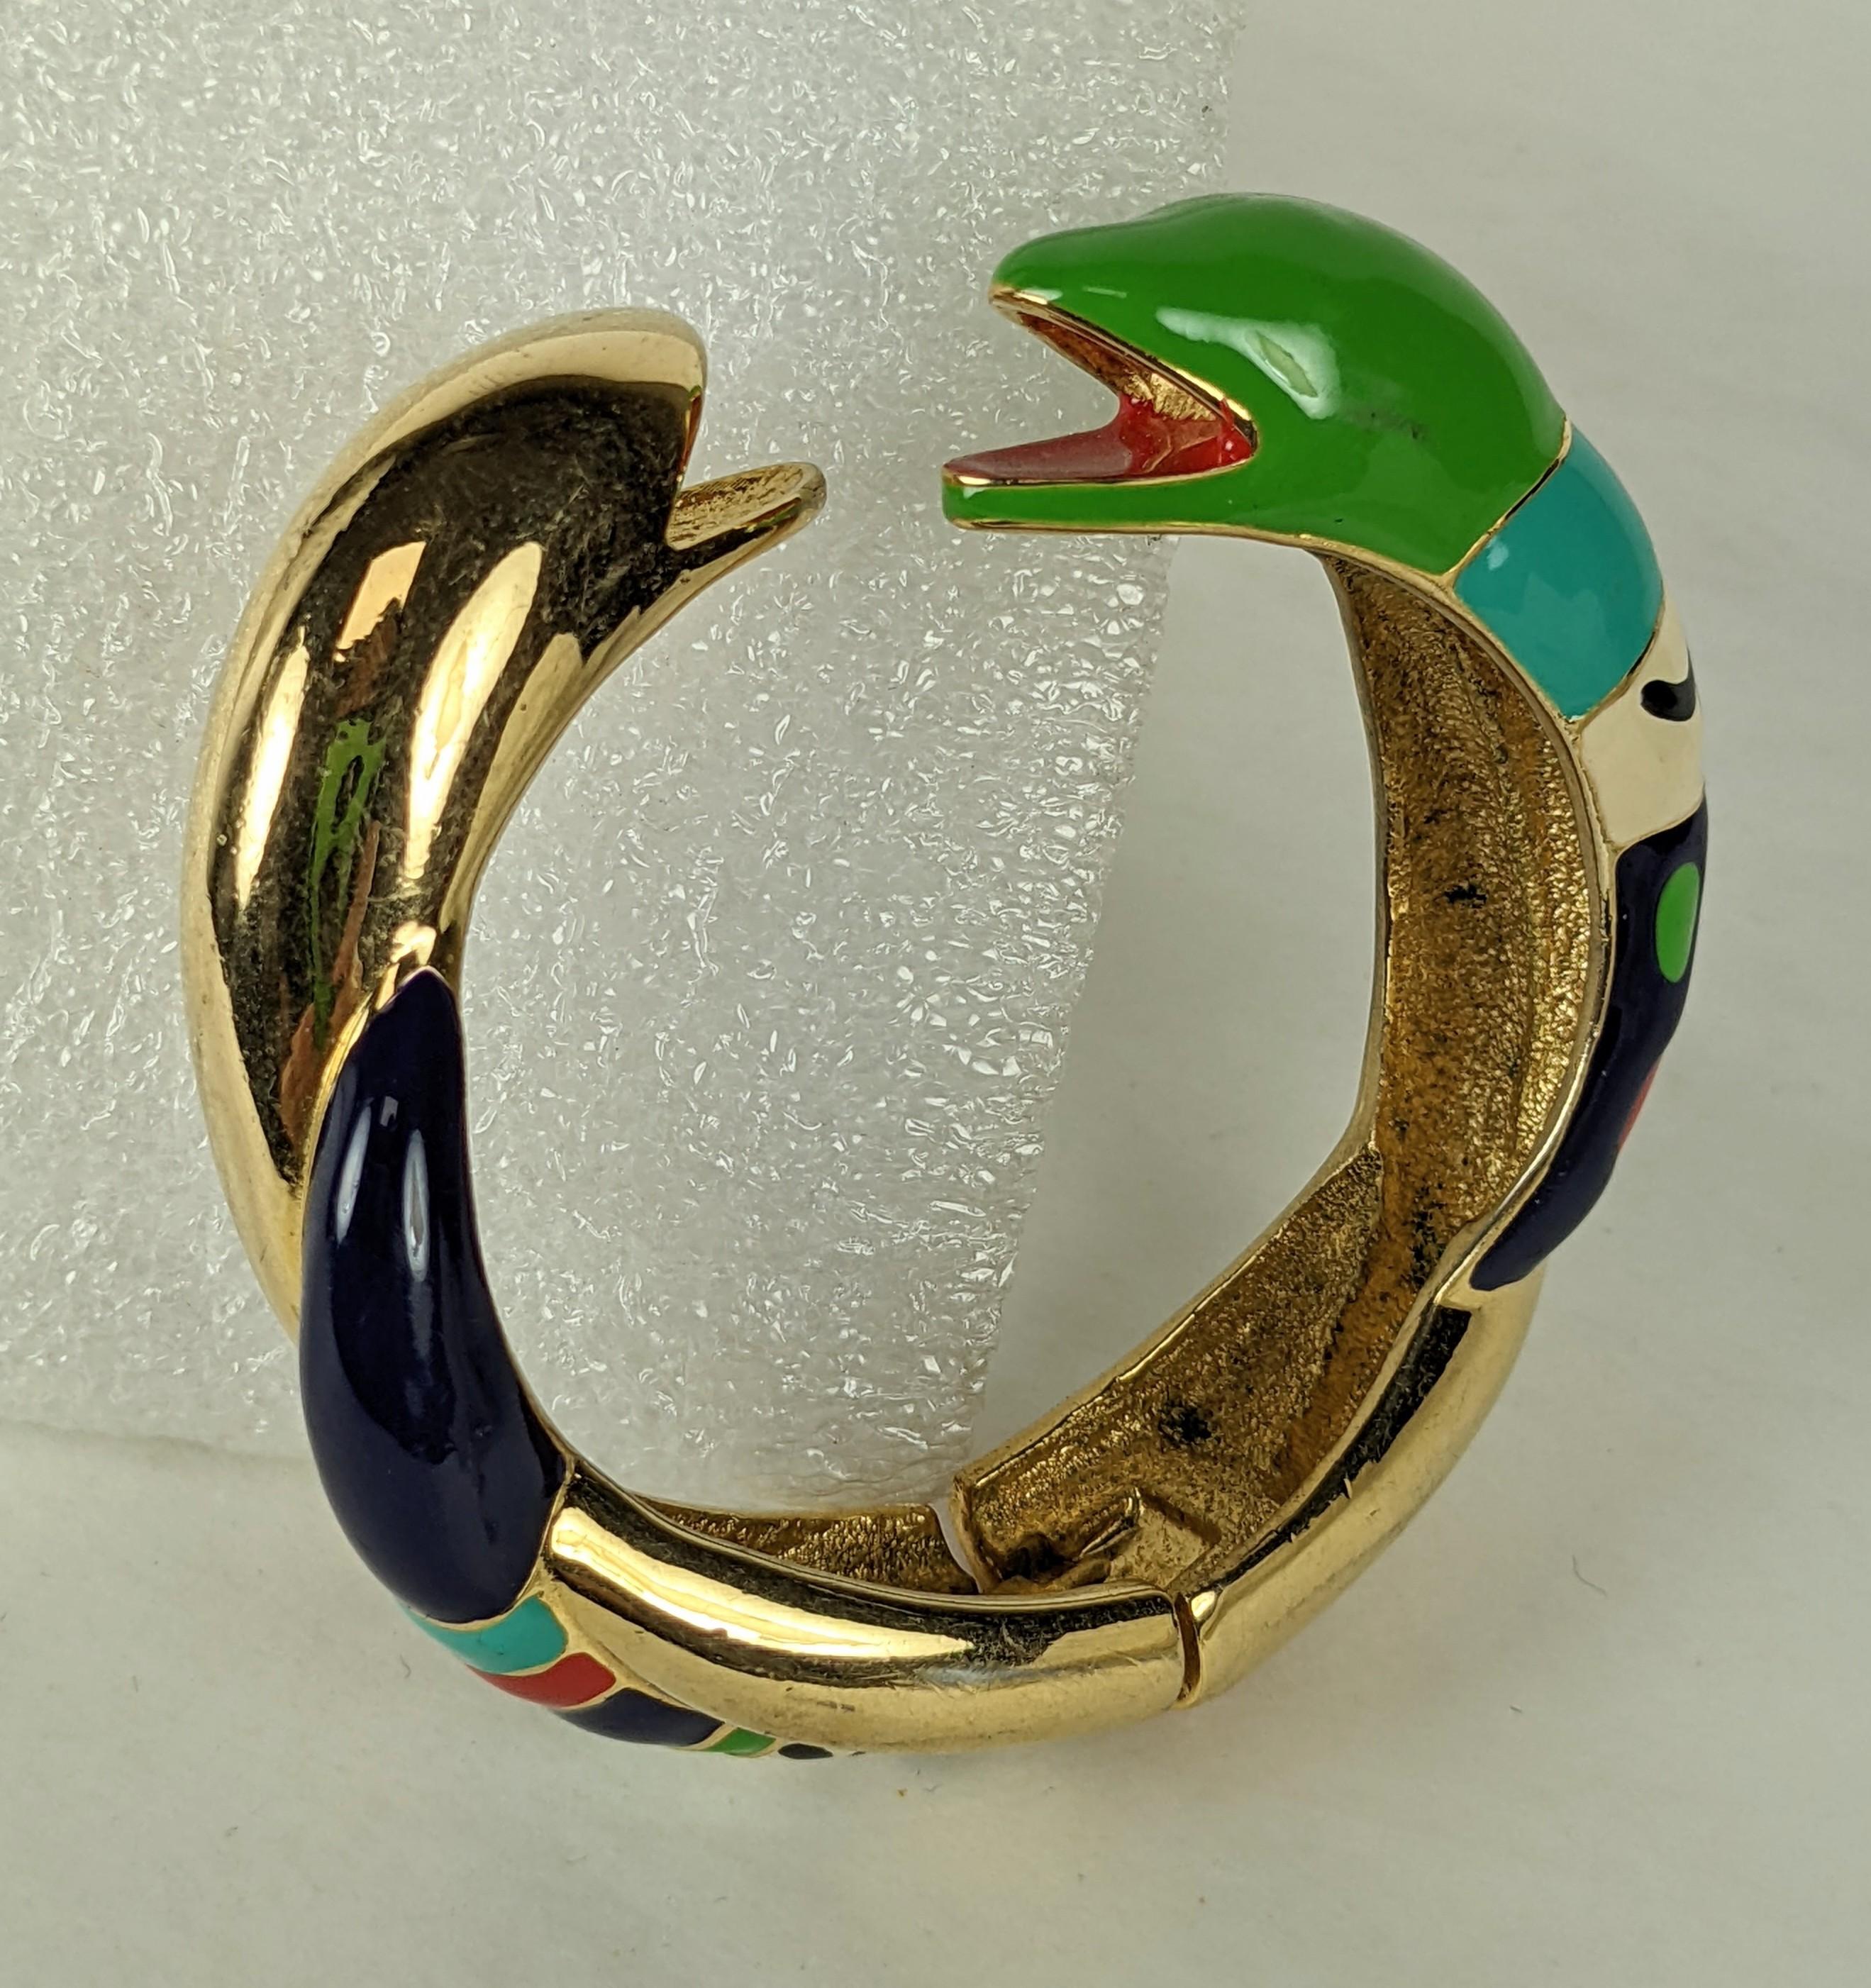 Nikki de St. Phalle Artisan Enamel Double Snake Bangle from the 1982. Polychrome enamel in the brightly hued tones this artist is known for. Lovely color way. France 1980's.
Clamper spring action closure (slightly loose).
Smaller size. 2